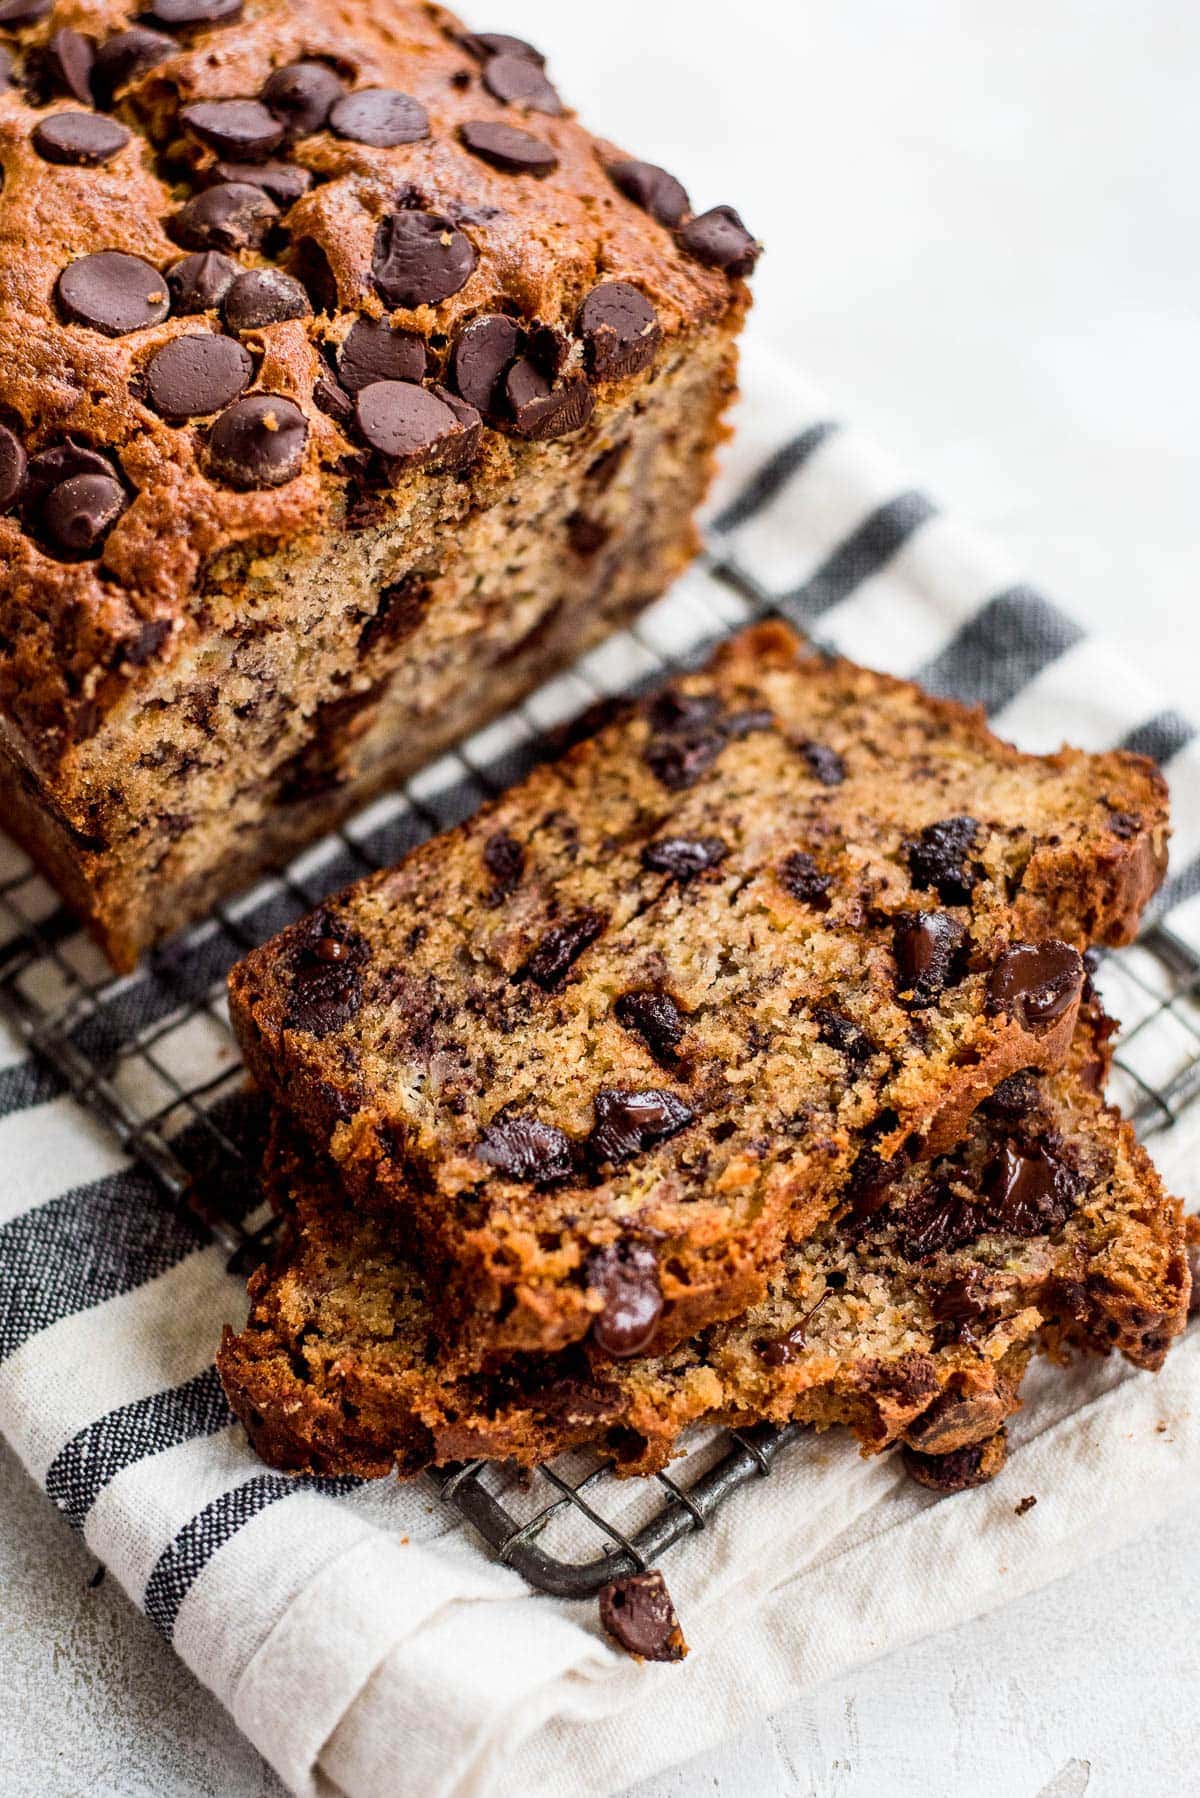 slices of chocolate chip banana bread